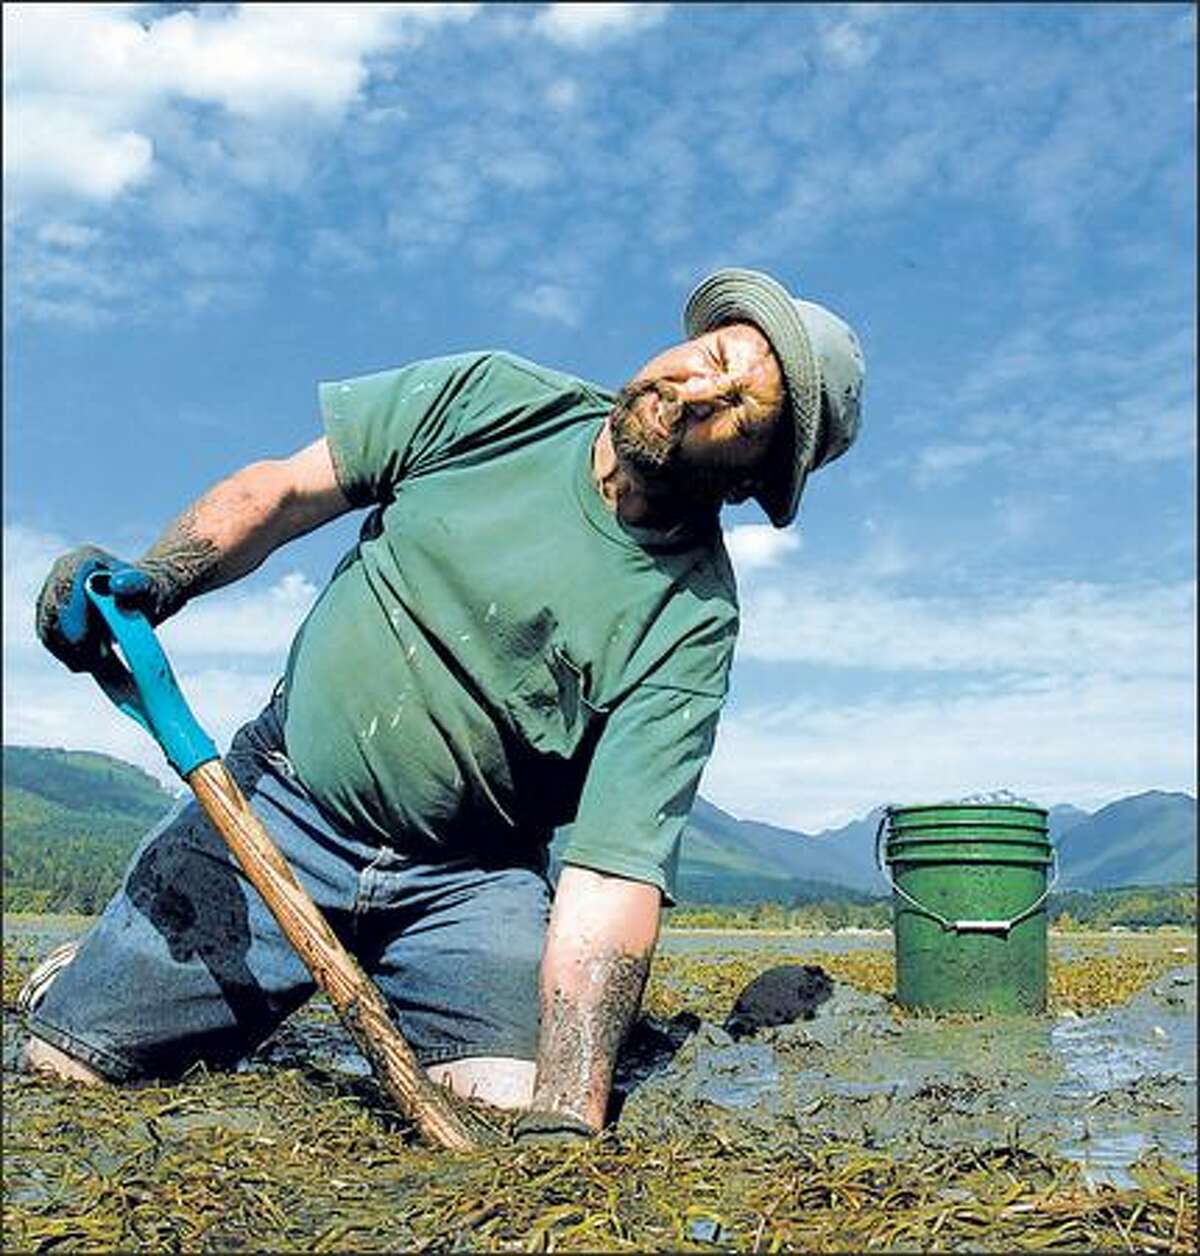 Jerry Strawn puts his all into digging for a geoduck in the Dosewallips State Park tideflats. Unfortunately, all that effort netted a relatively small clam.